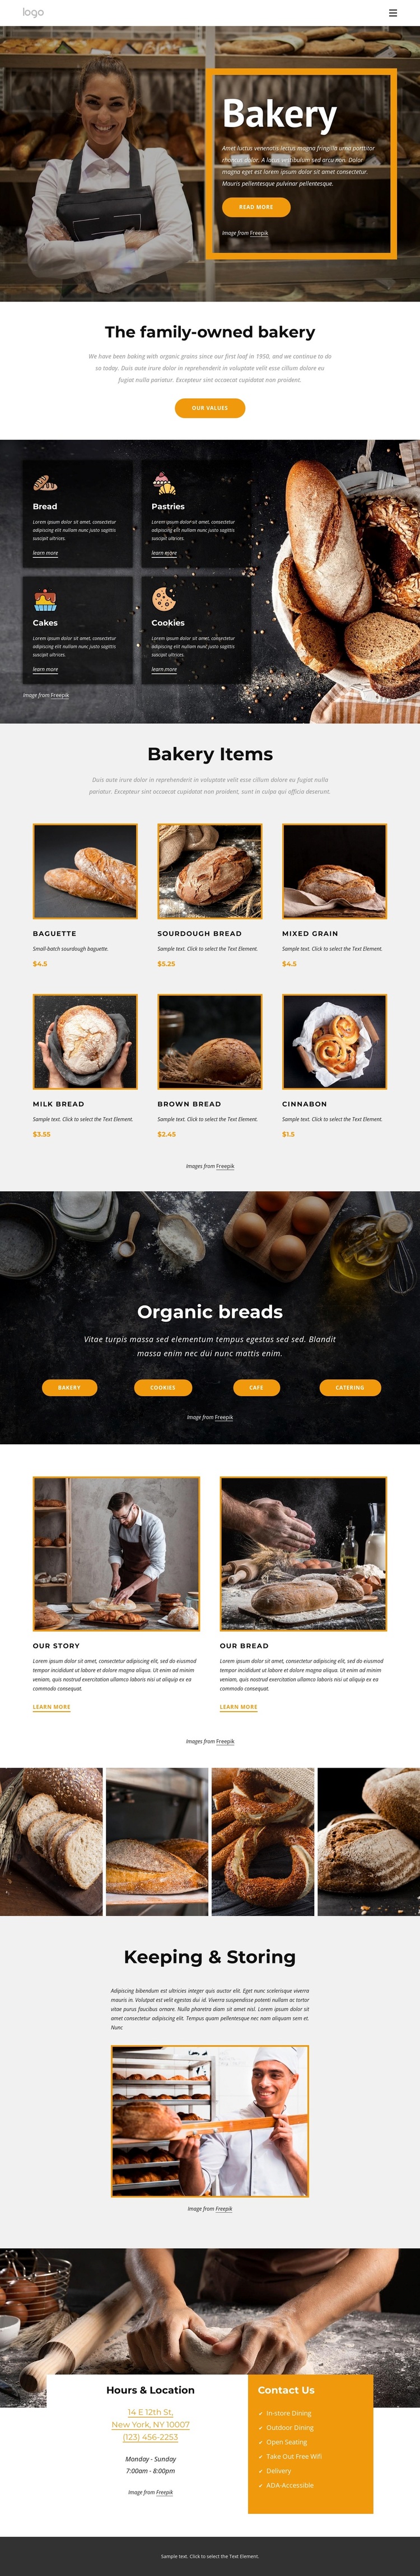 The family-owned bakery Template